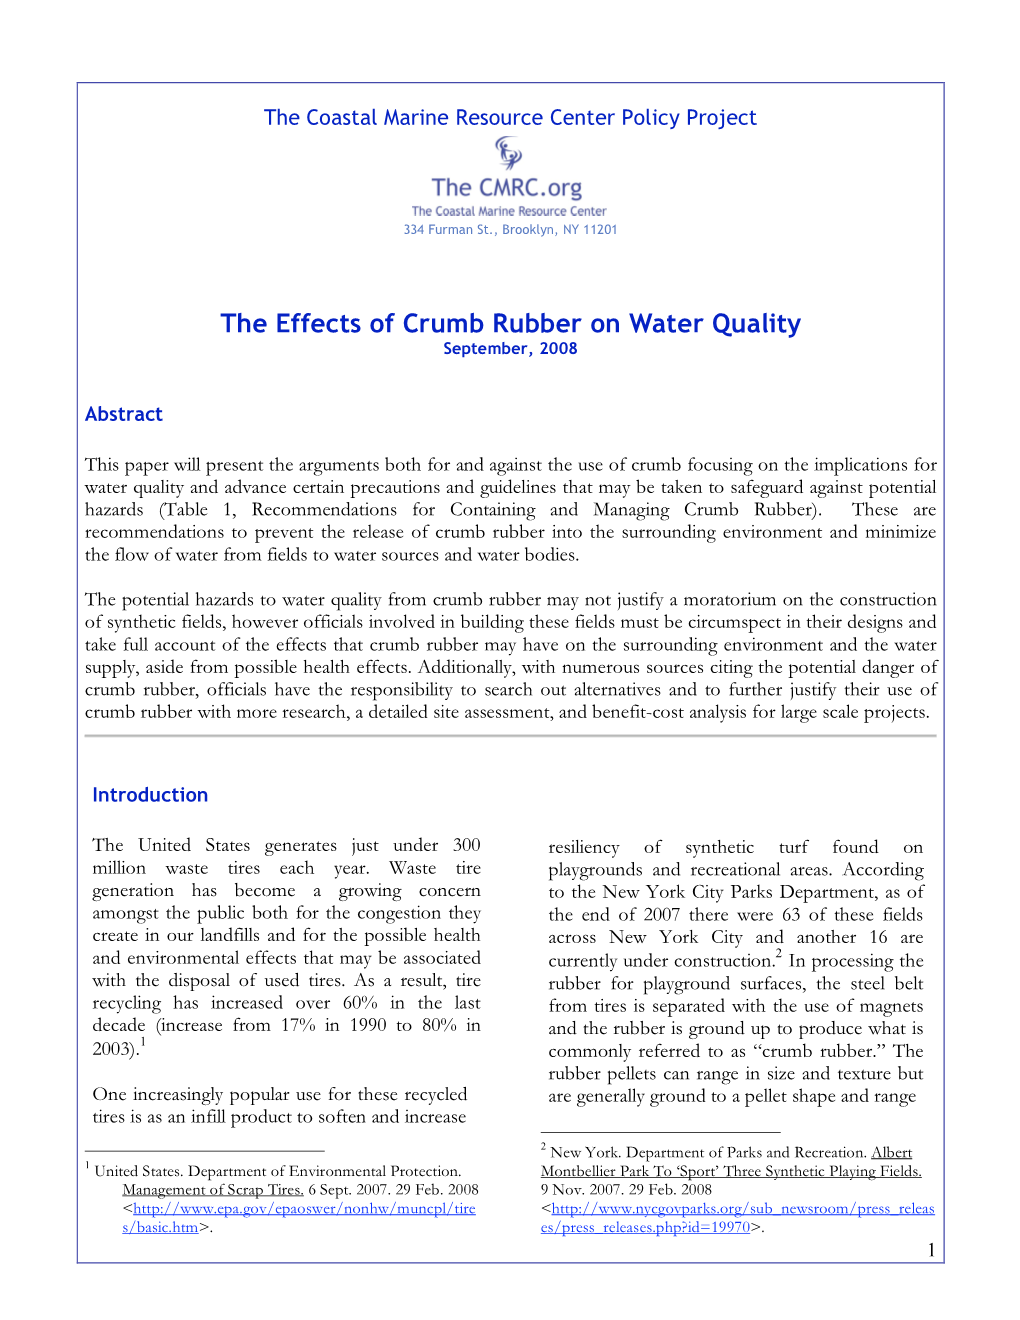 The Effects of Crumb Rubber on Water Quality September, 2008